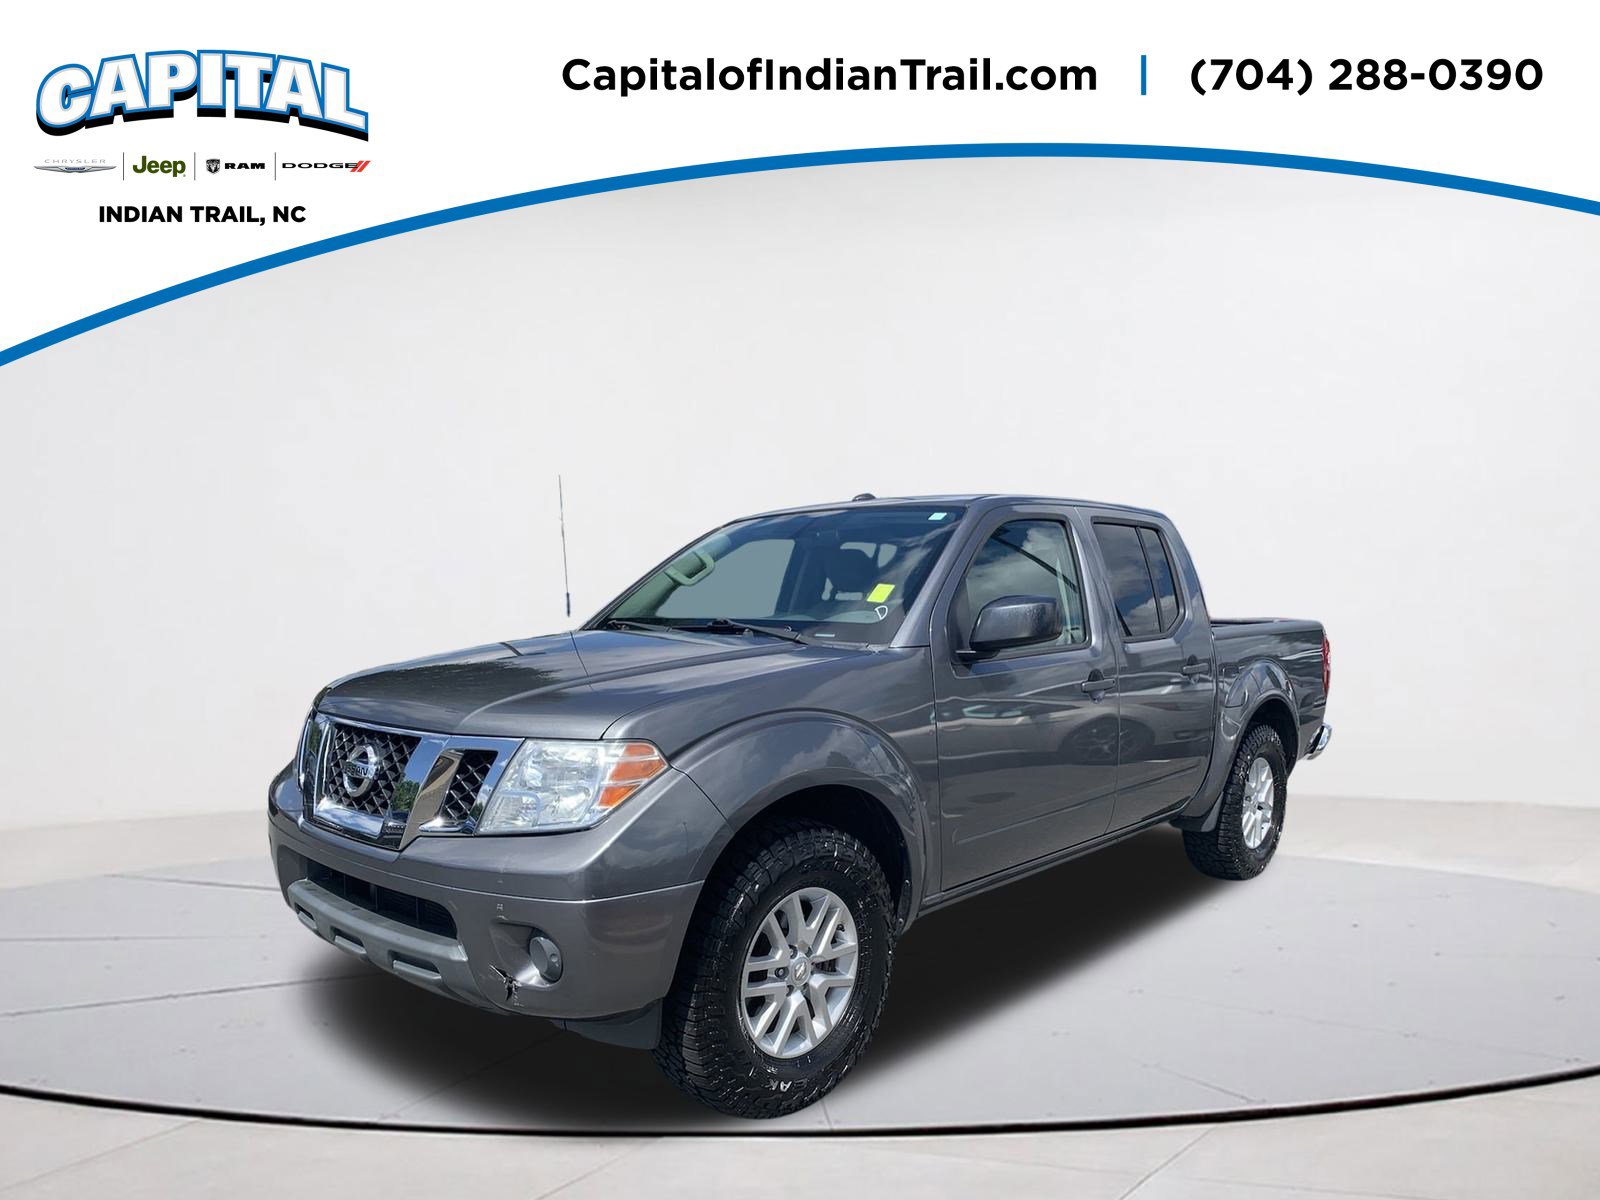 2018 Nissan Frontier Indian Trail NC